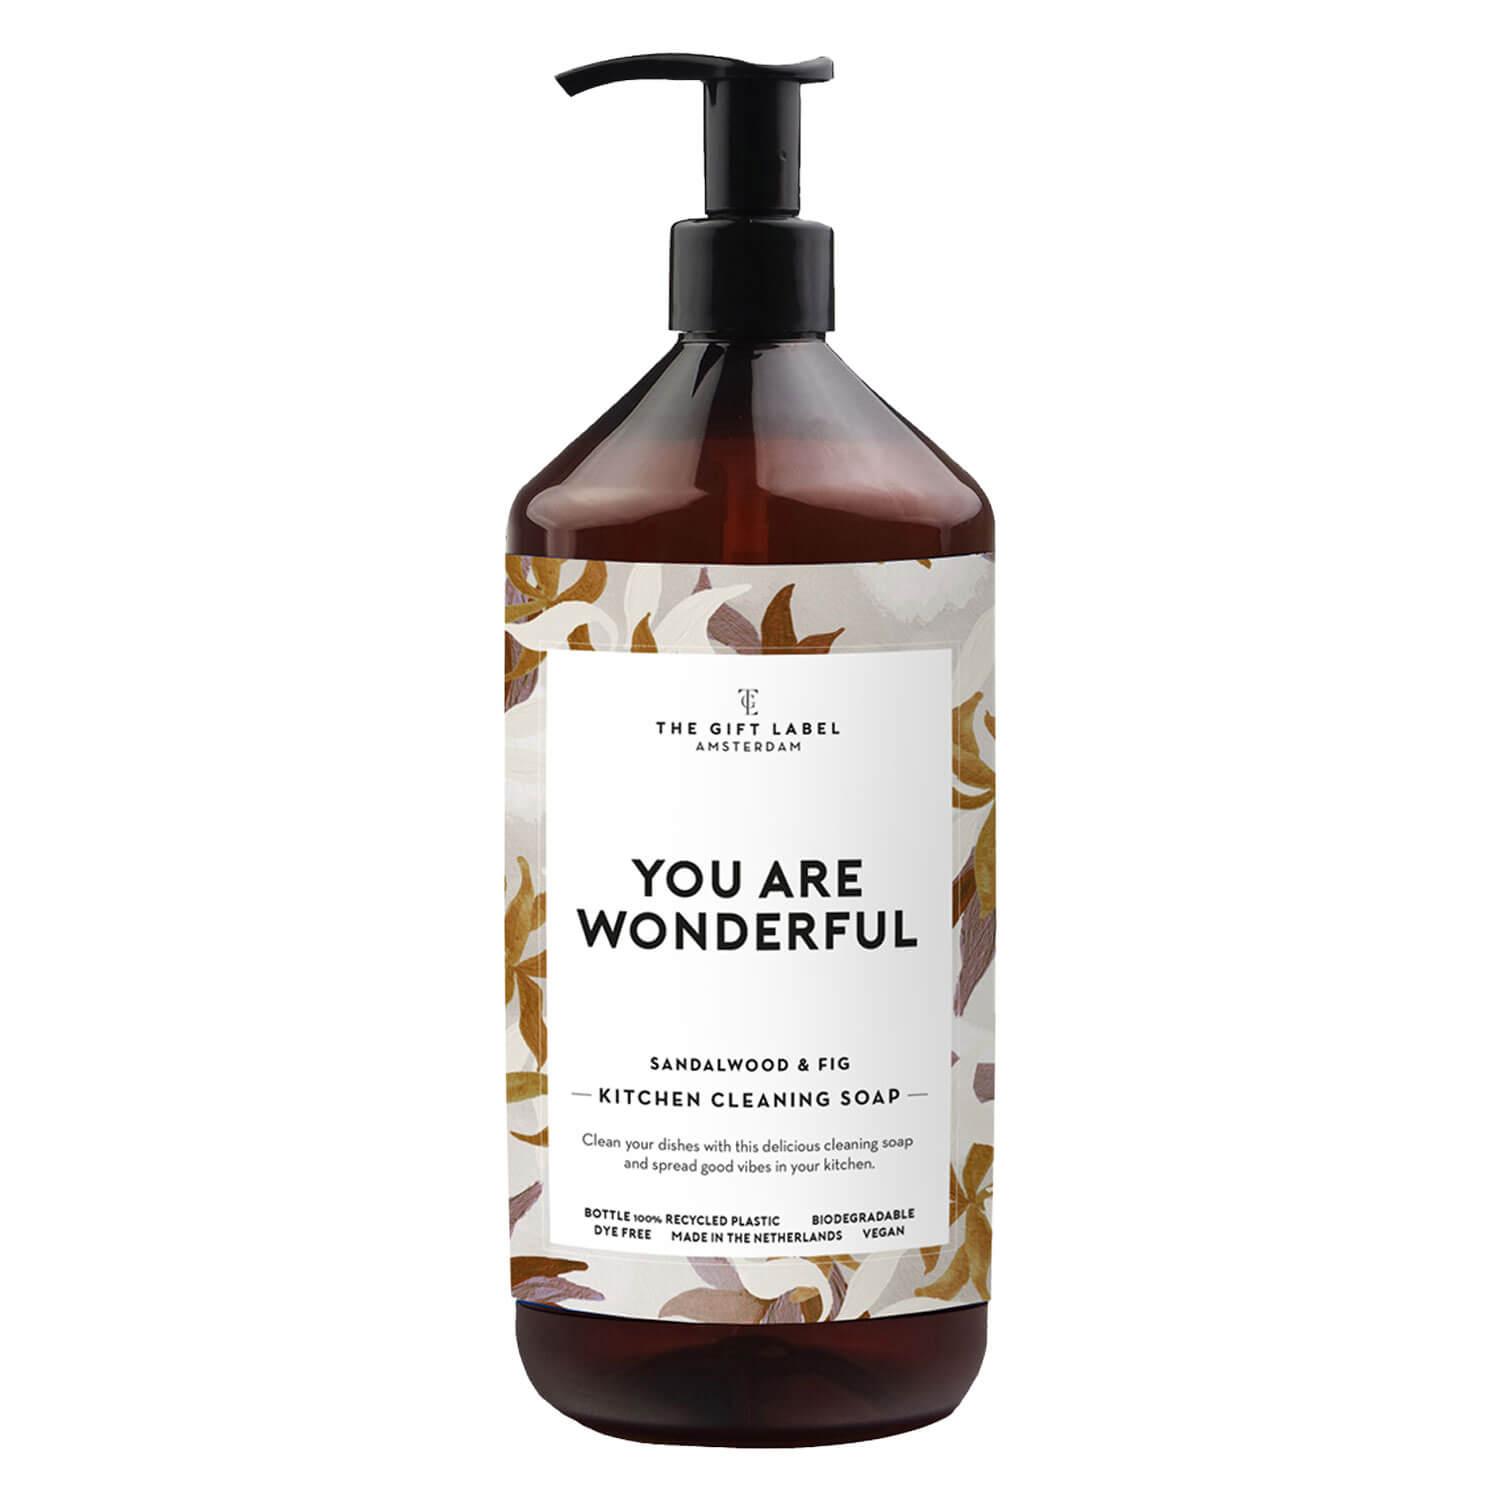 TGL Home - Kitchen Cleaning Soap You Are Wonderful